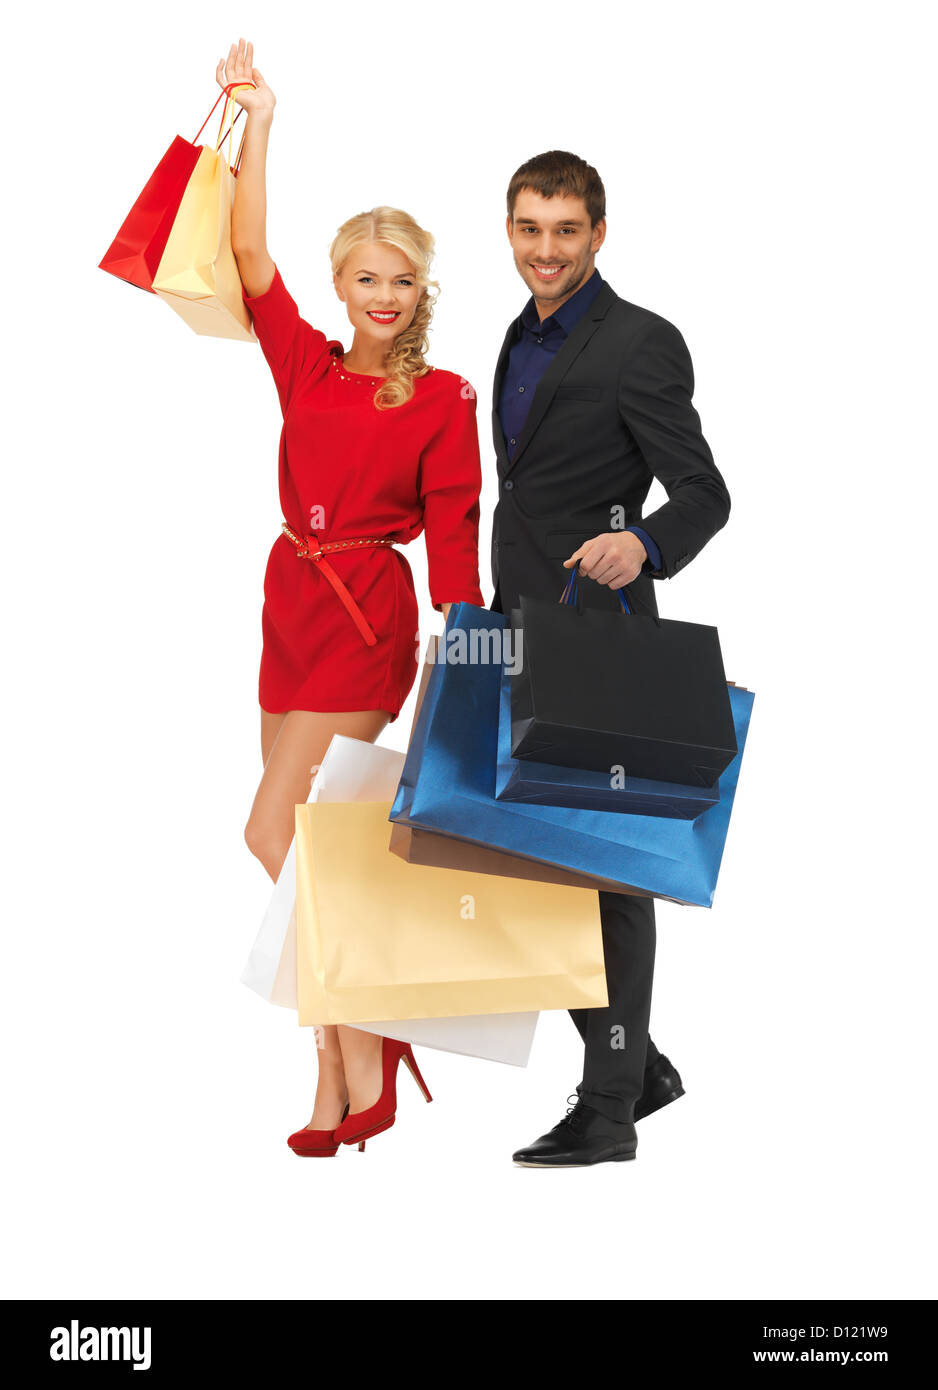 man and woman with shopping bags Stock Photo